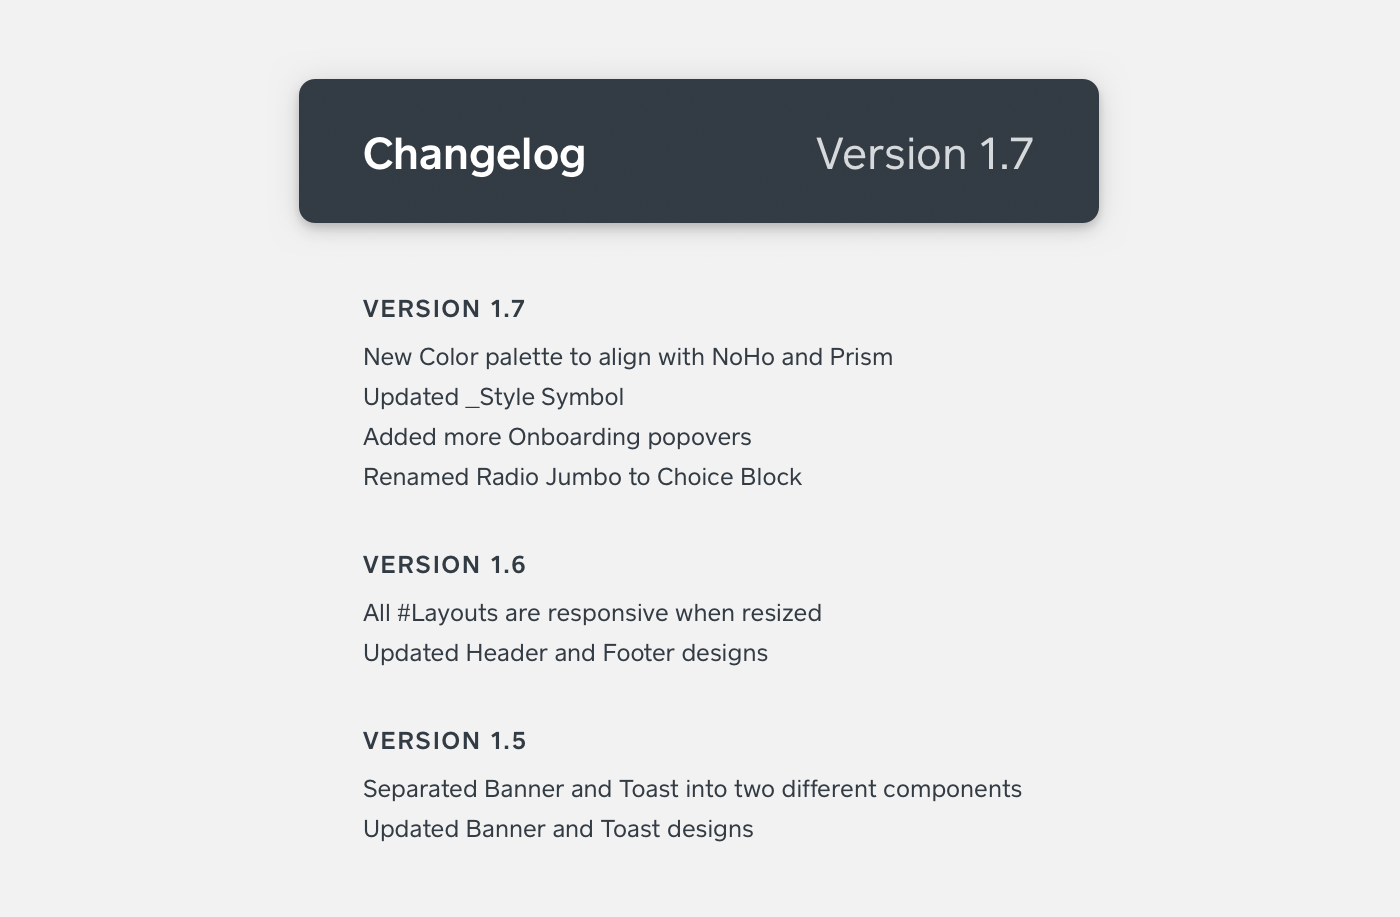 Stay updated with changelog.